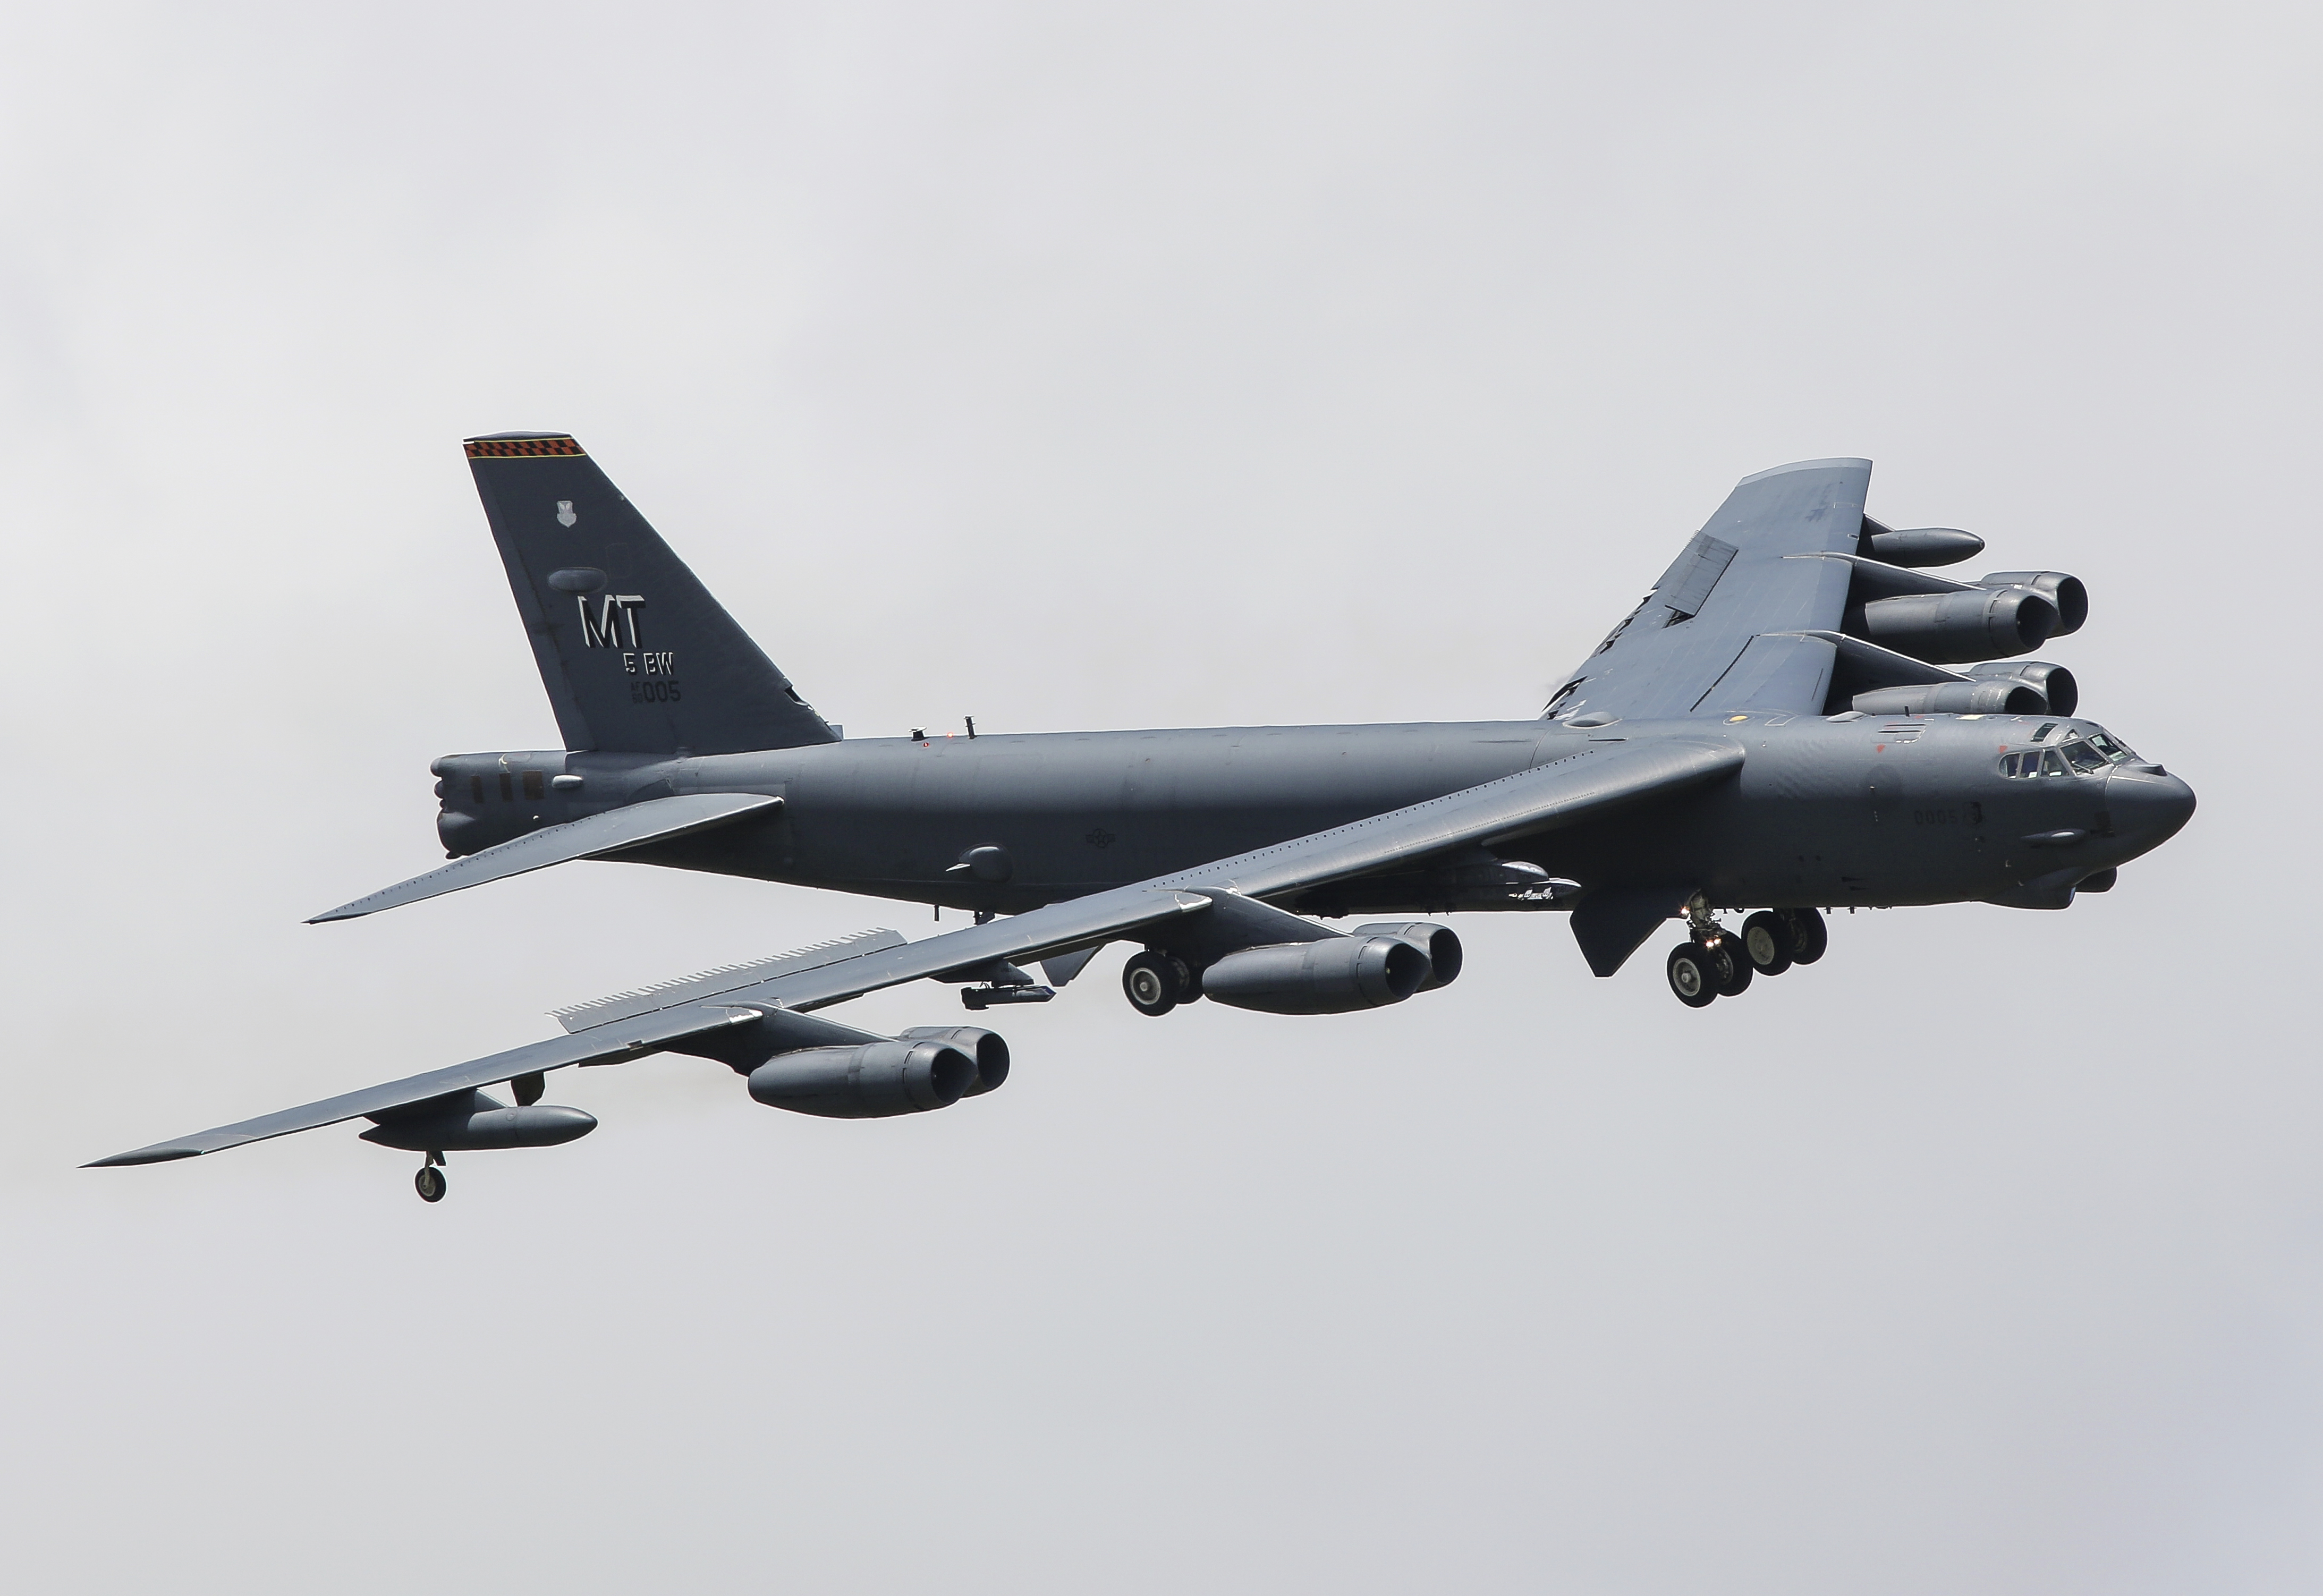 military, boeing b 52 stratofortress, air force, aircraft, airplane, boeing, bomber, warplane, bombers